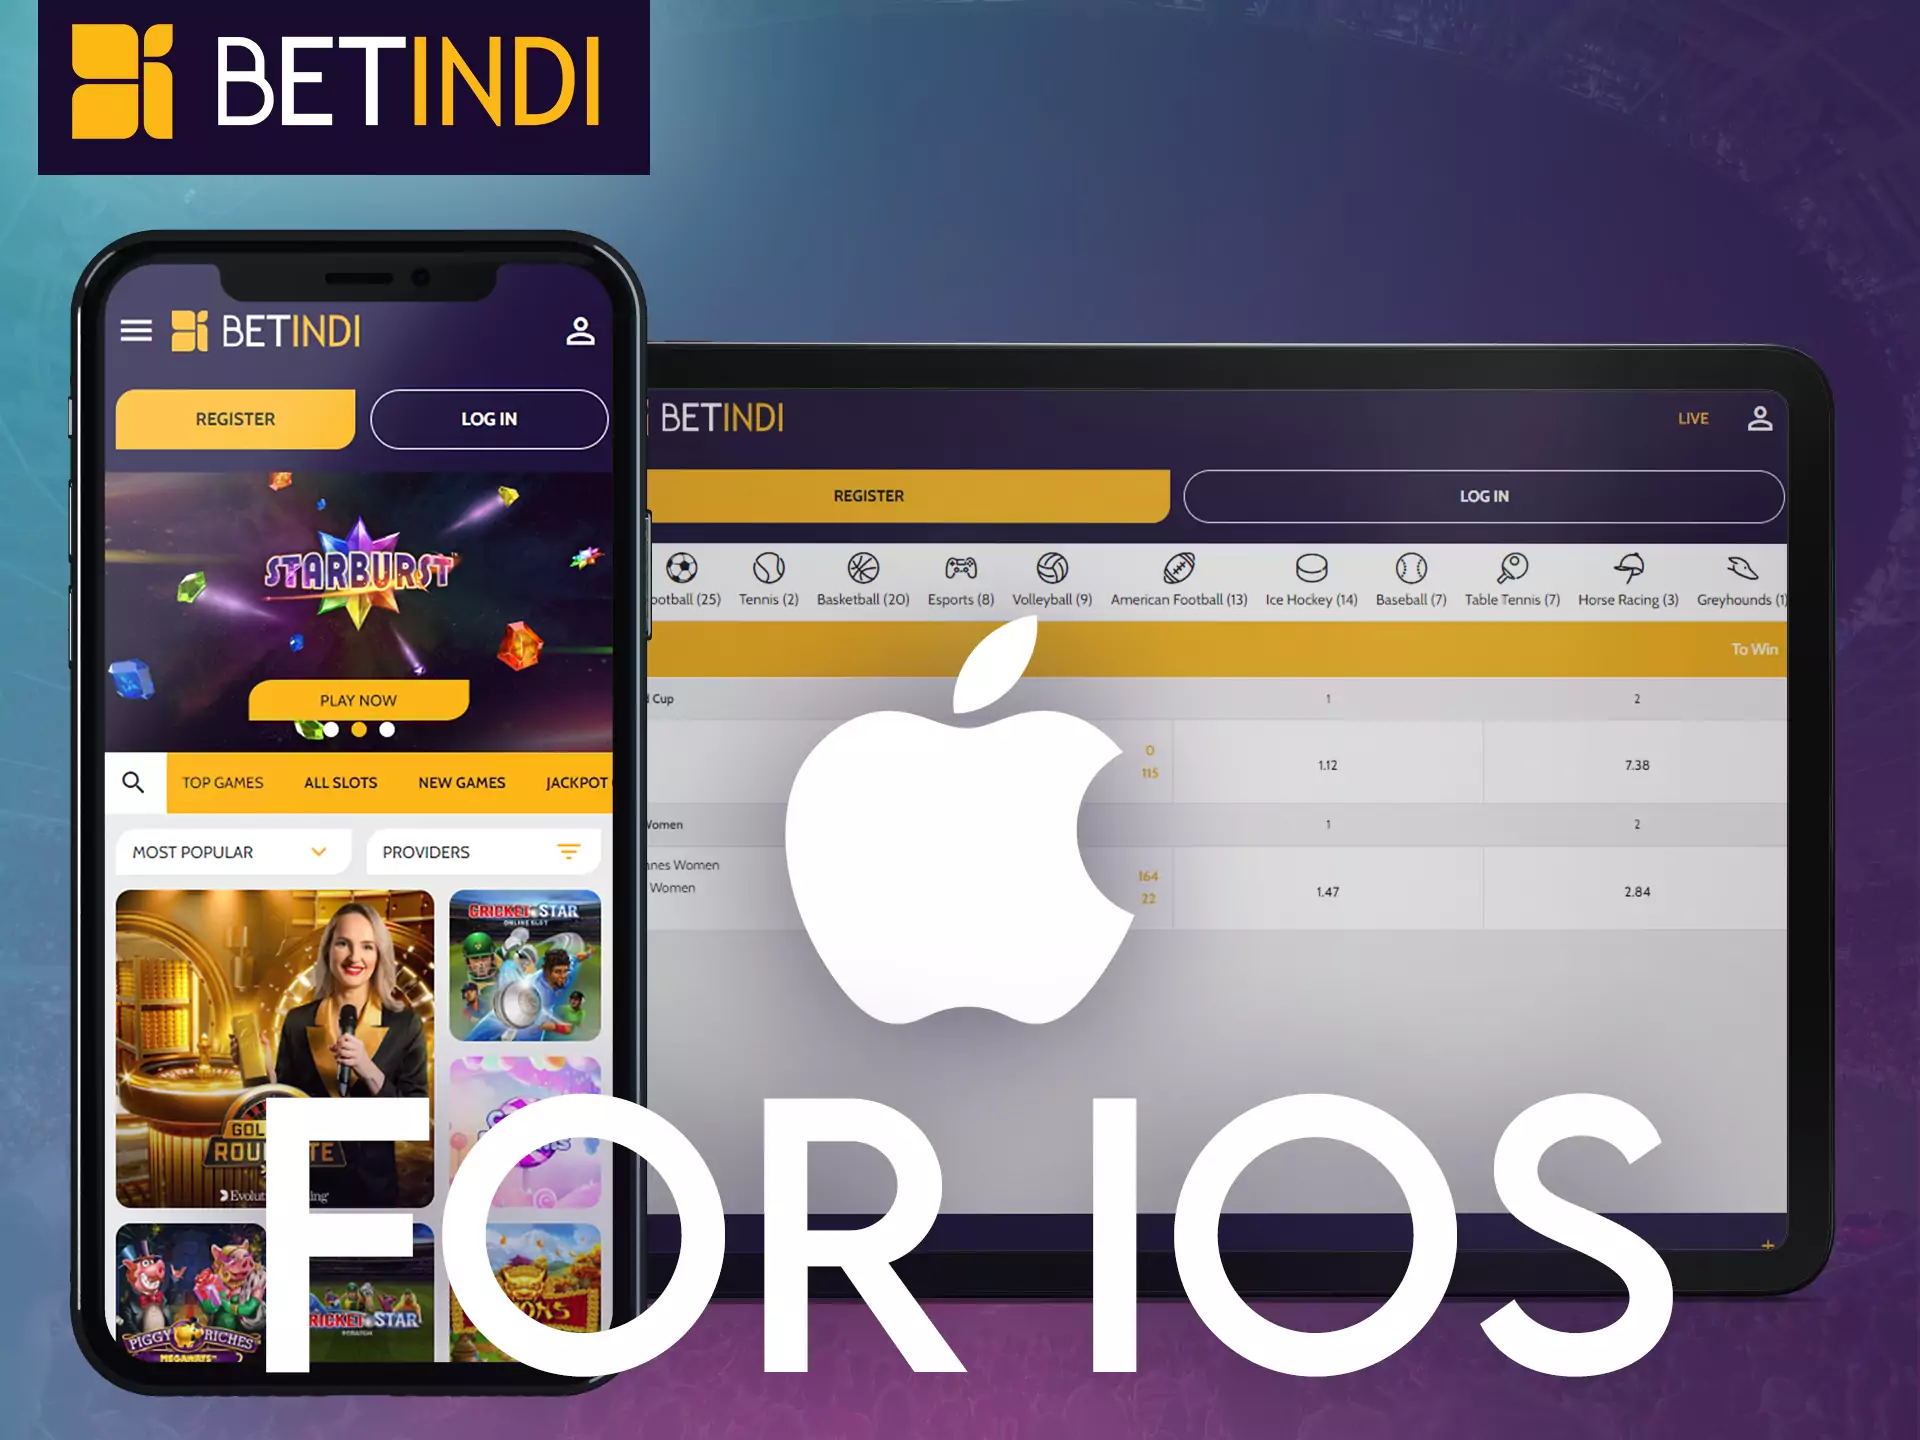 The Betindi application can be installed on different devices with iOS.